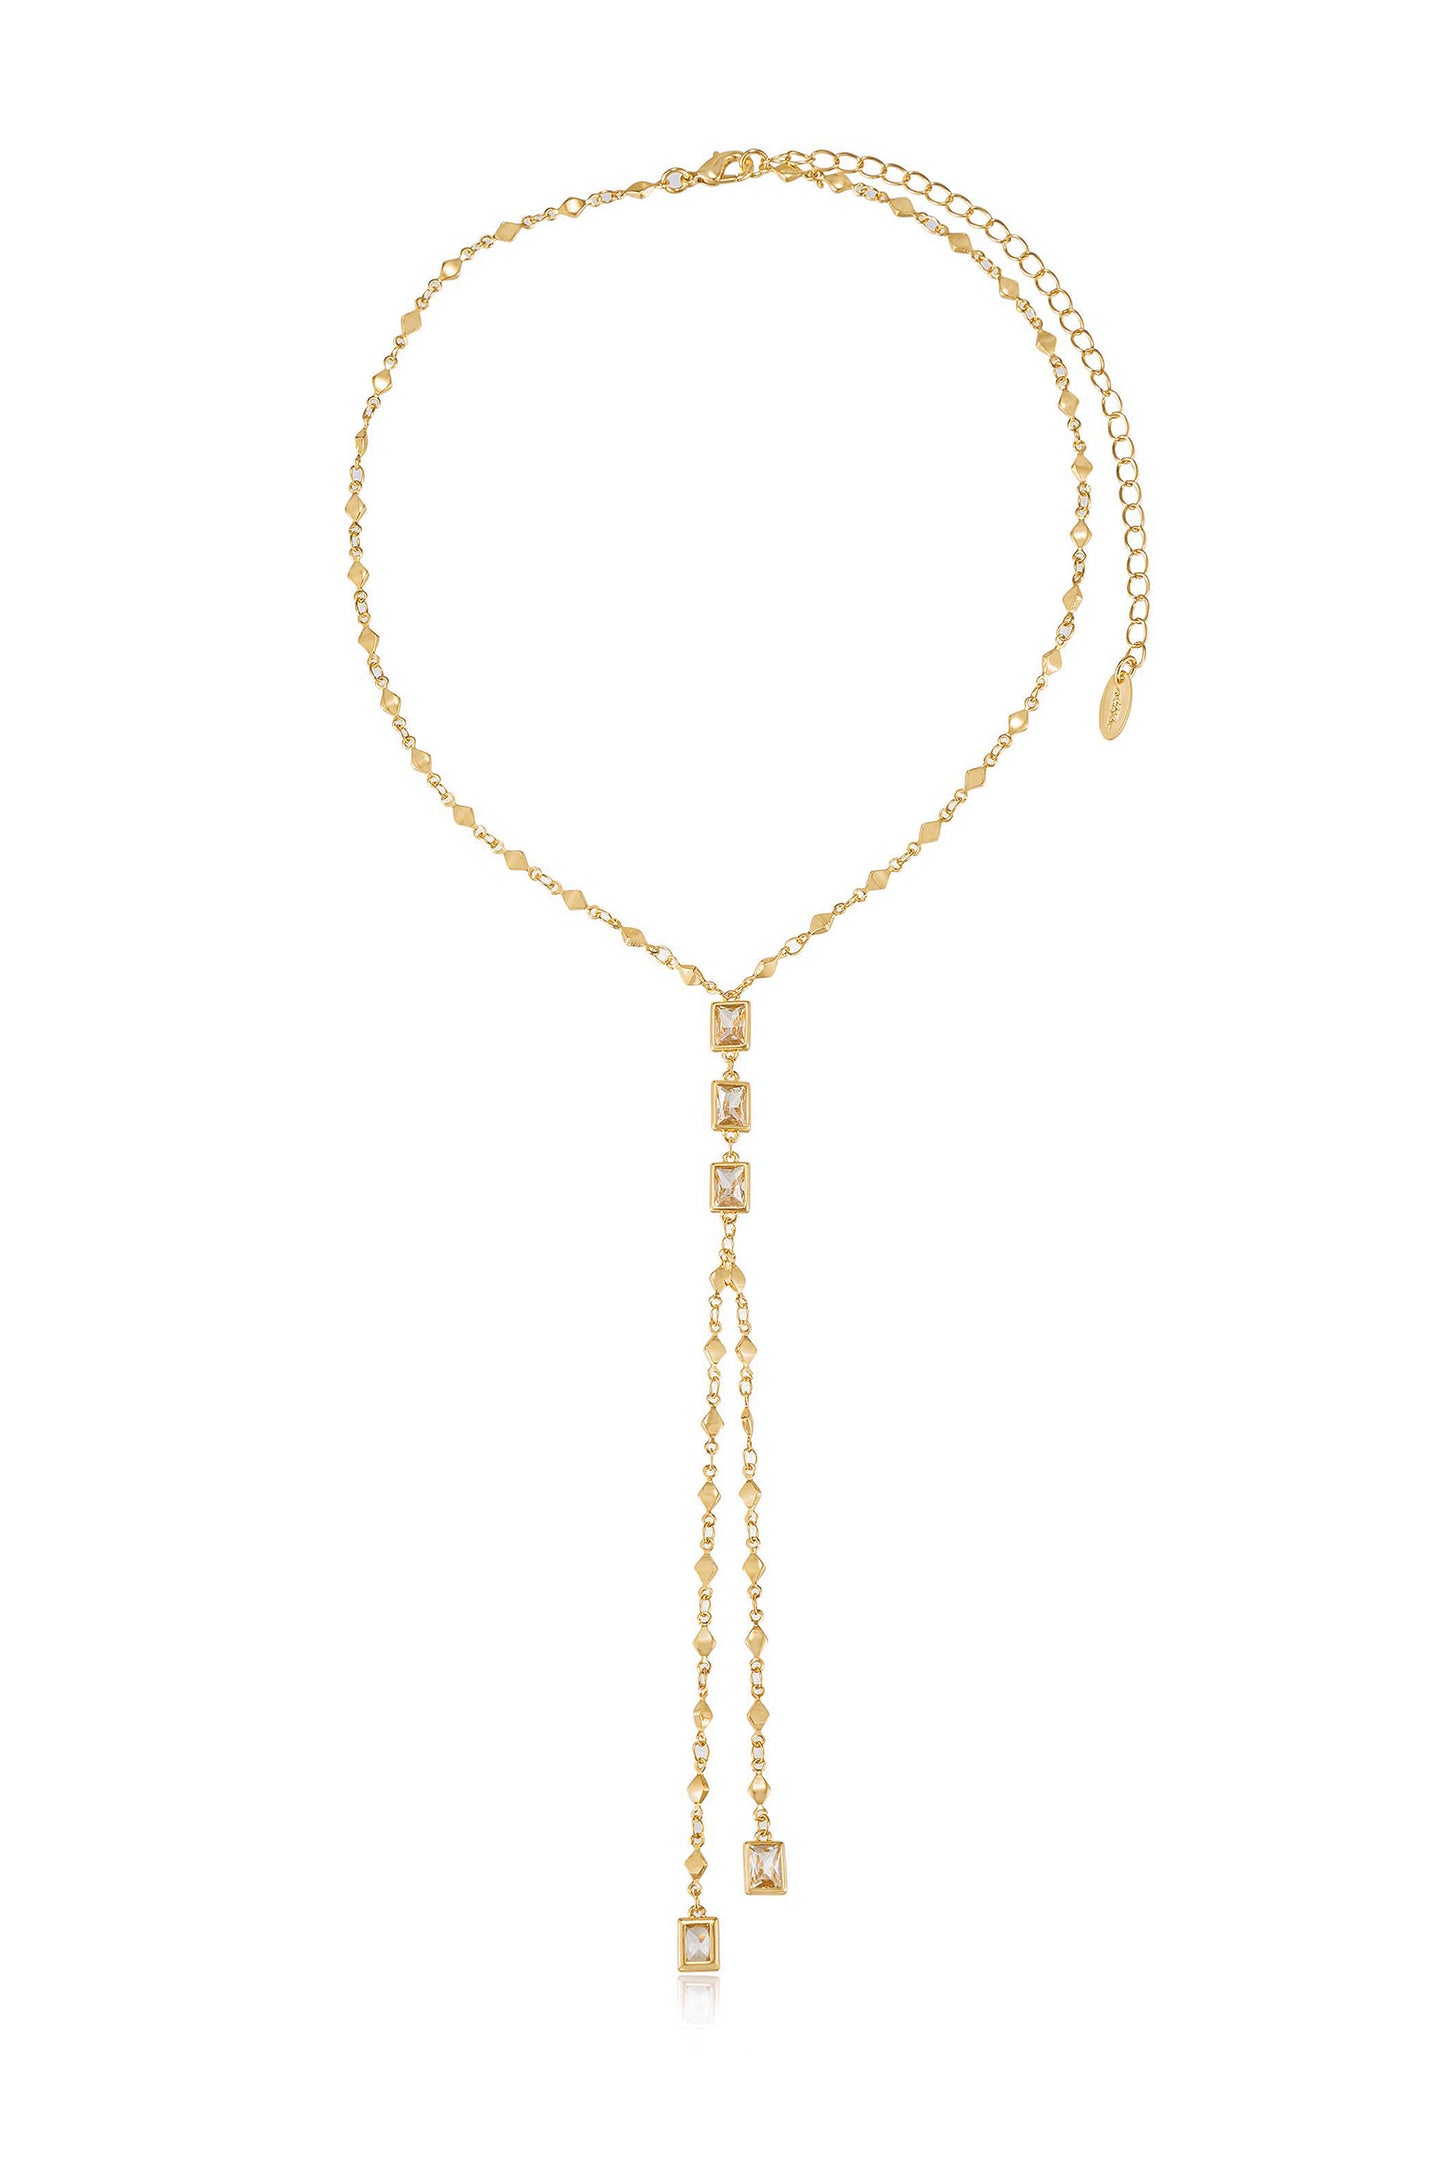 Behind the Glam 18k Gold Plated Necklace full